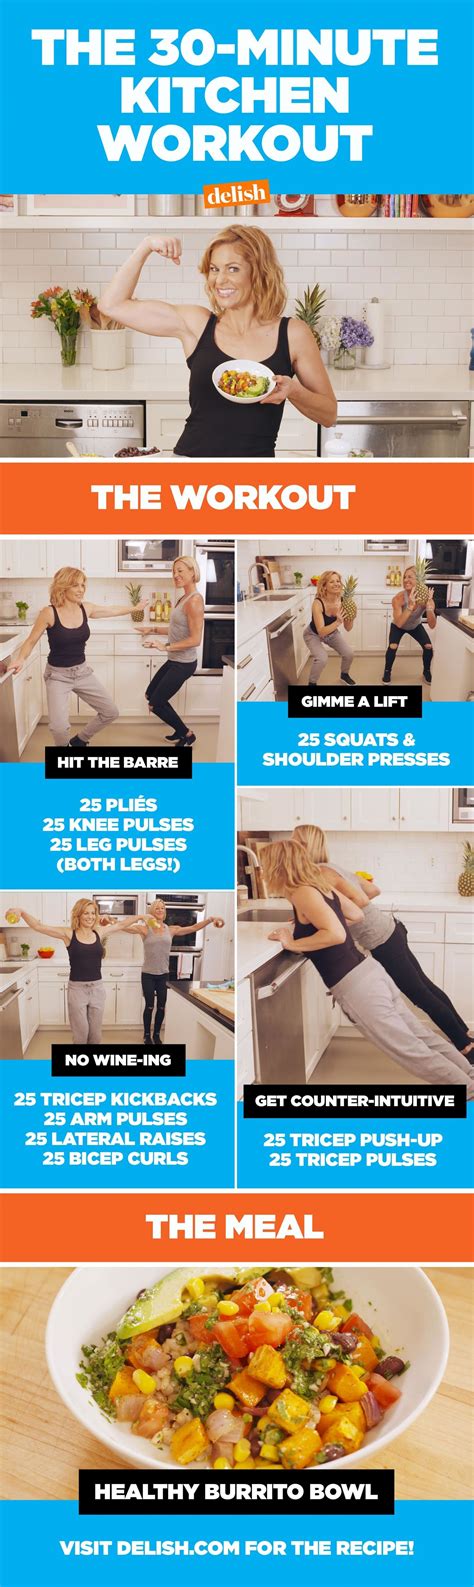 Heres How Candace Cameron Bure Makes Dinner And Works Out In 30